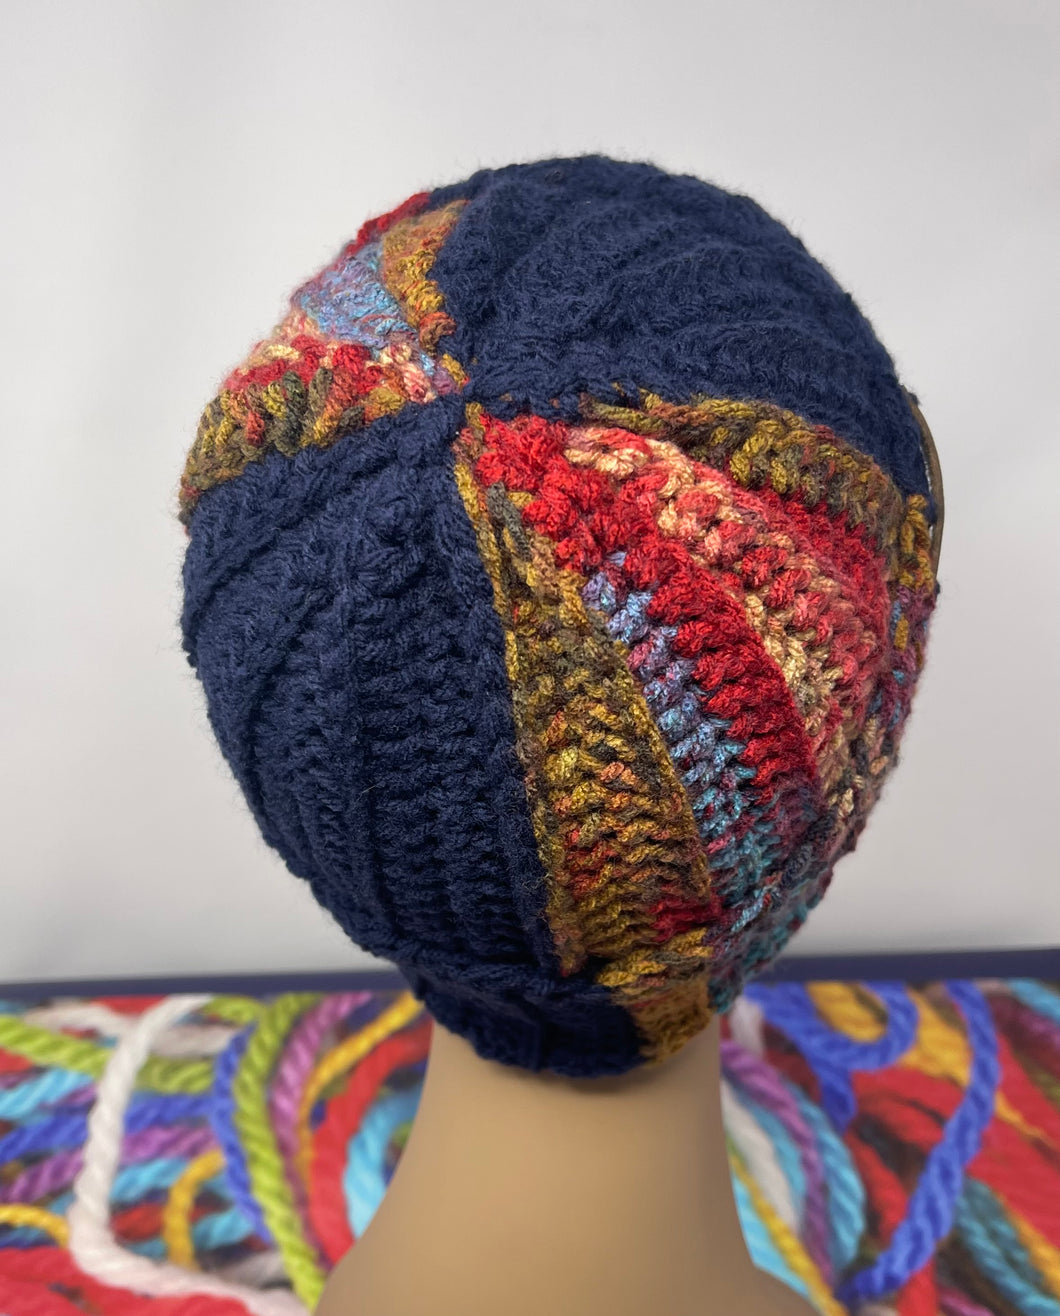 Navy and multi color crochet hat